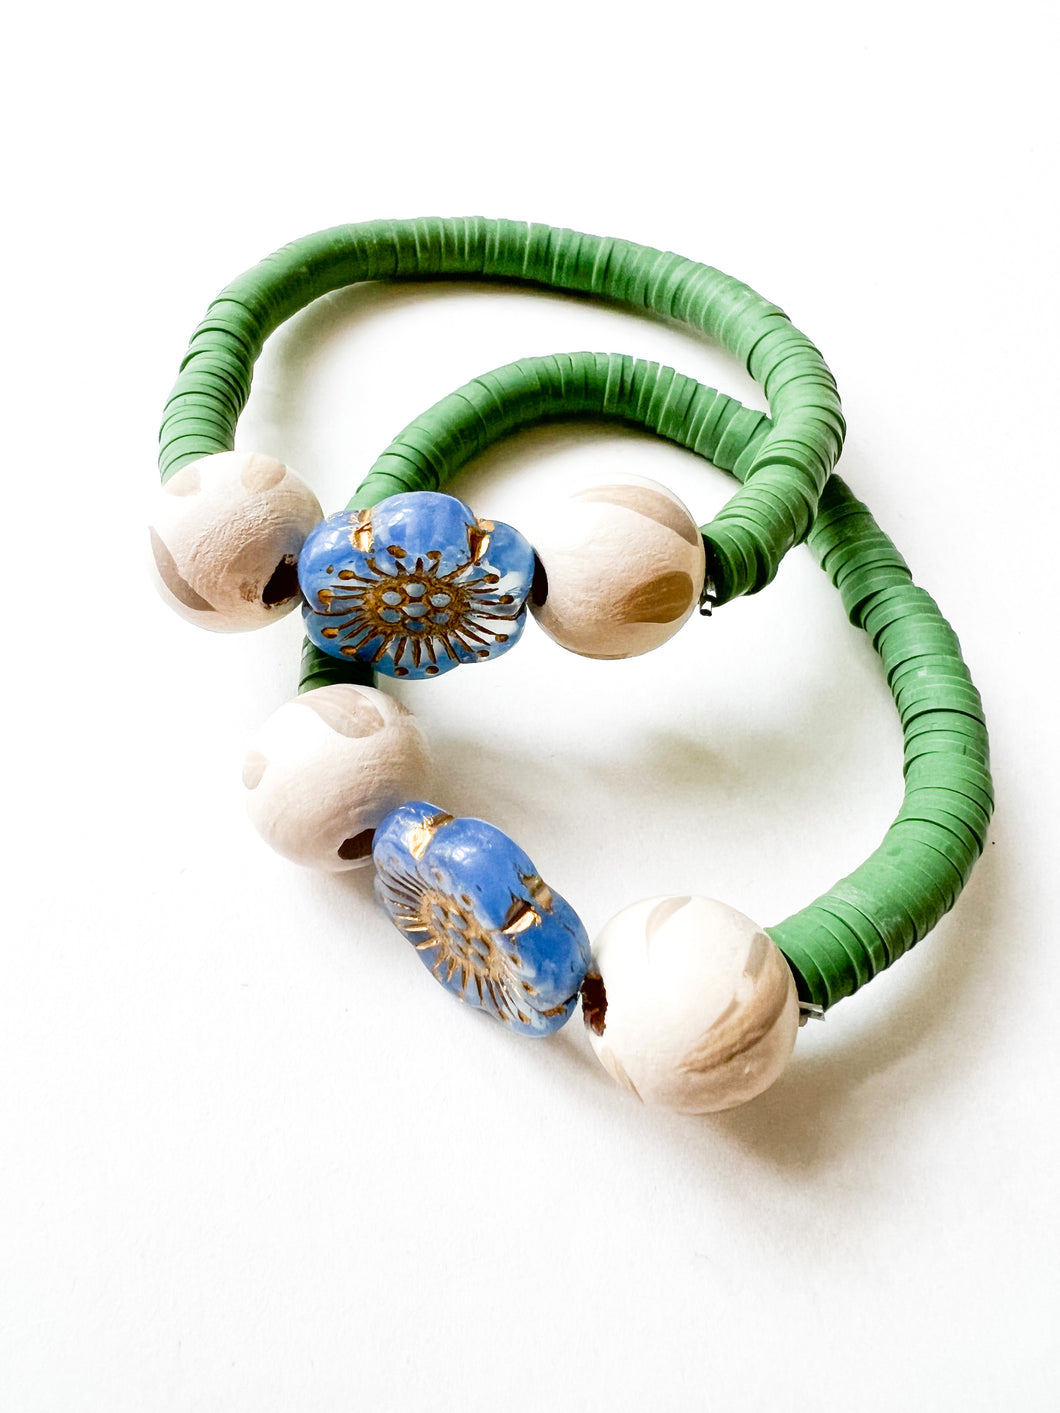 Blue Floral and Grass Green Clay Hand Painted Bracelet